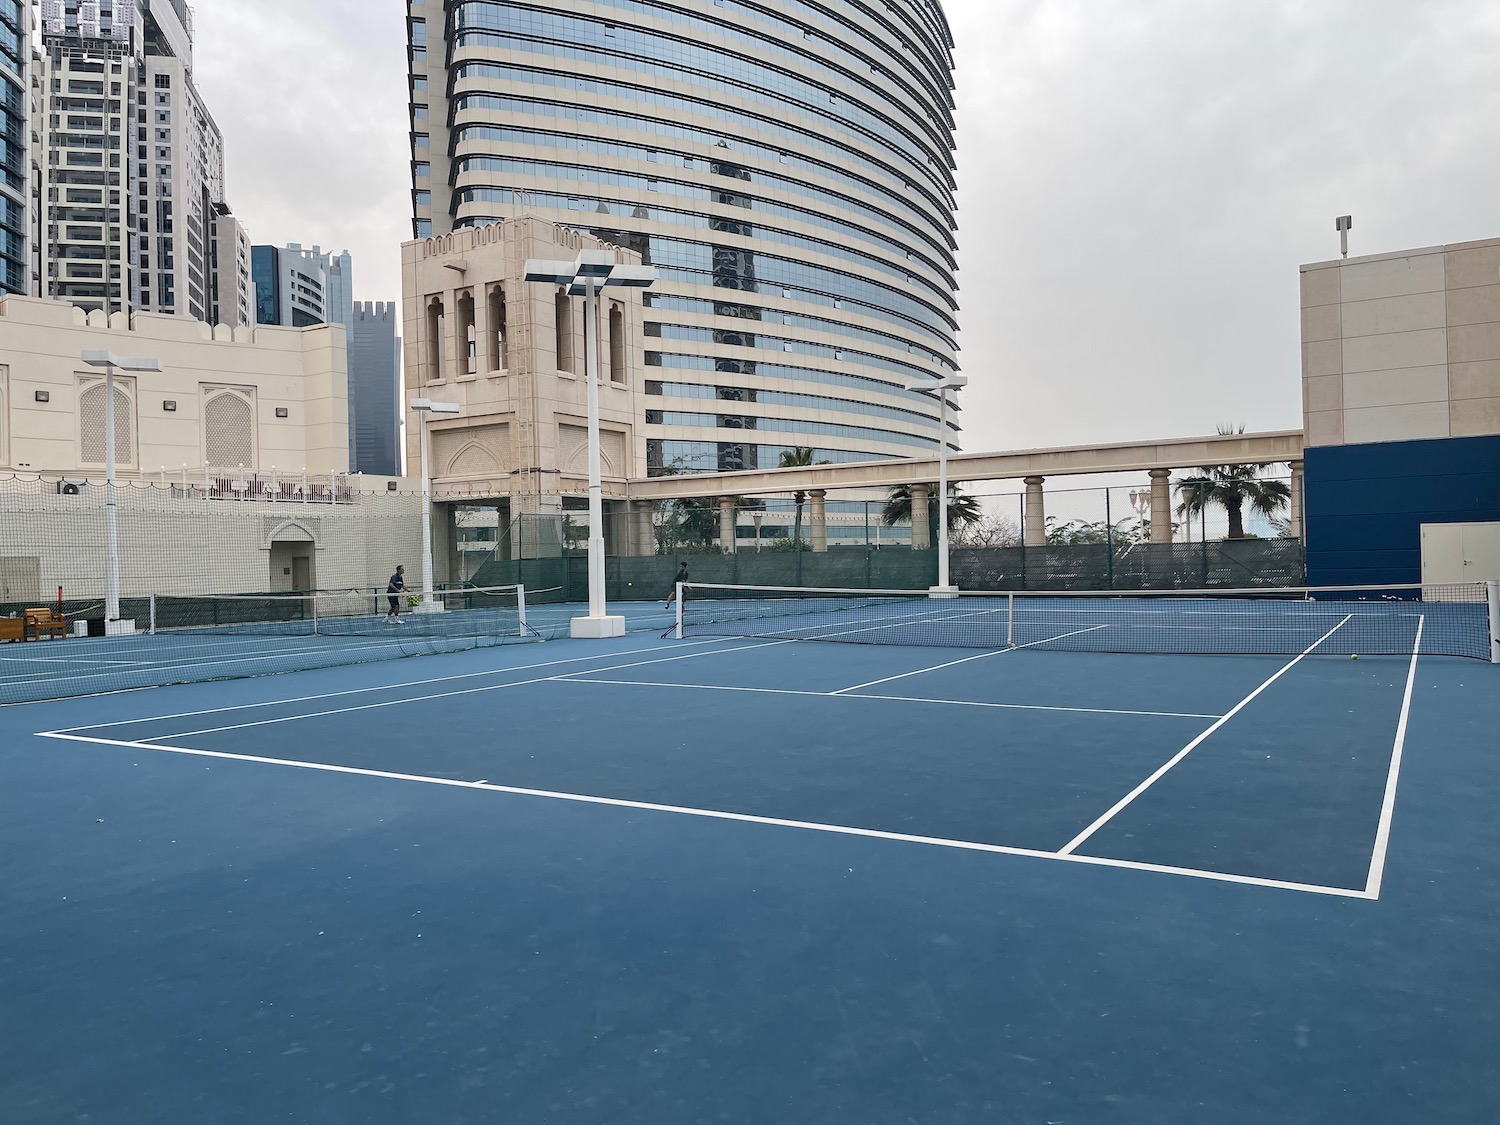 a tennis court with a tall building in the background